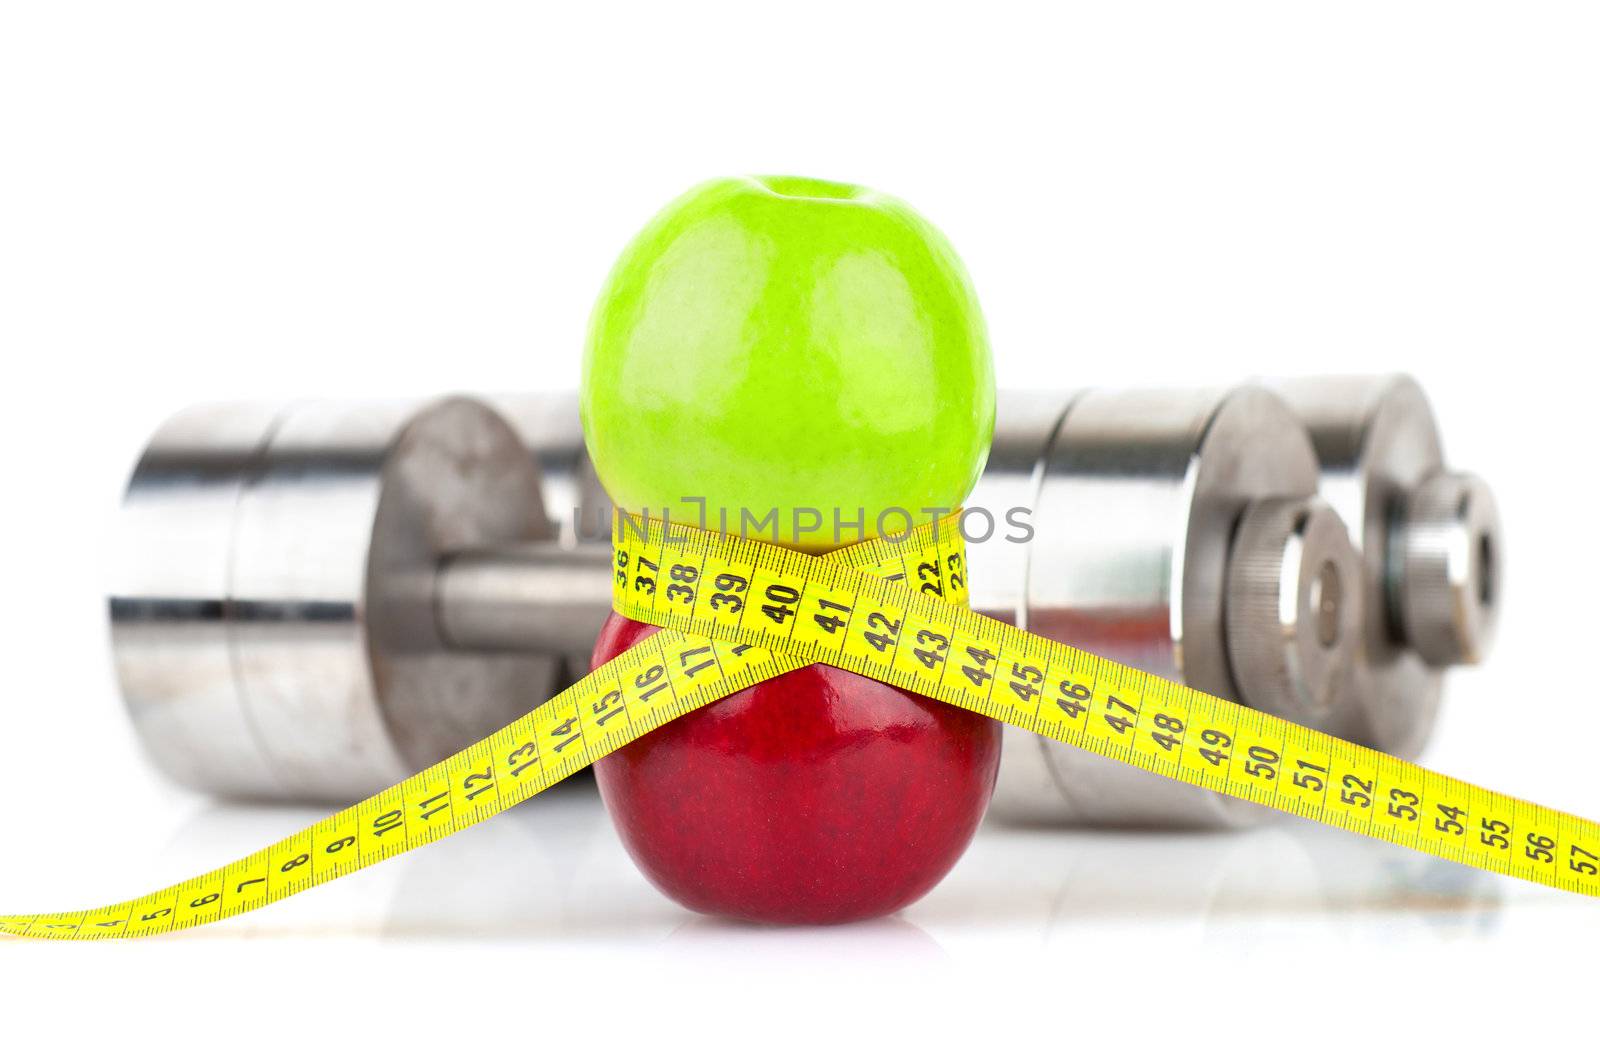 Apples, measuring tape and dumbbells by georgenightingale